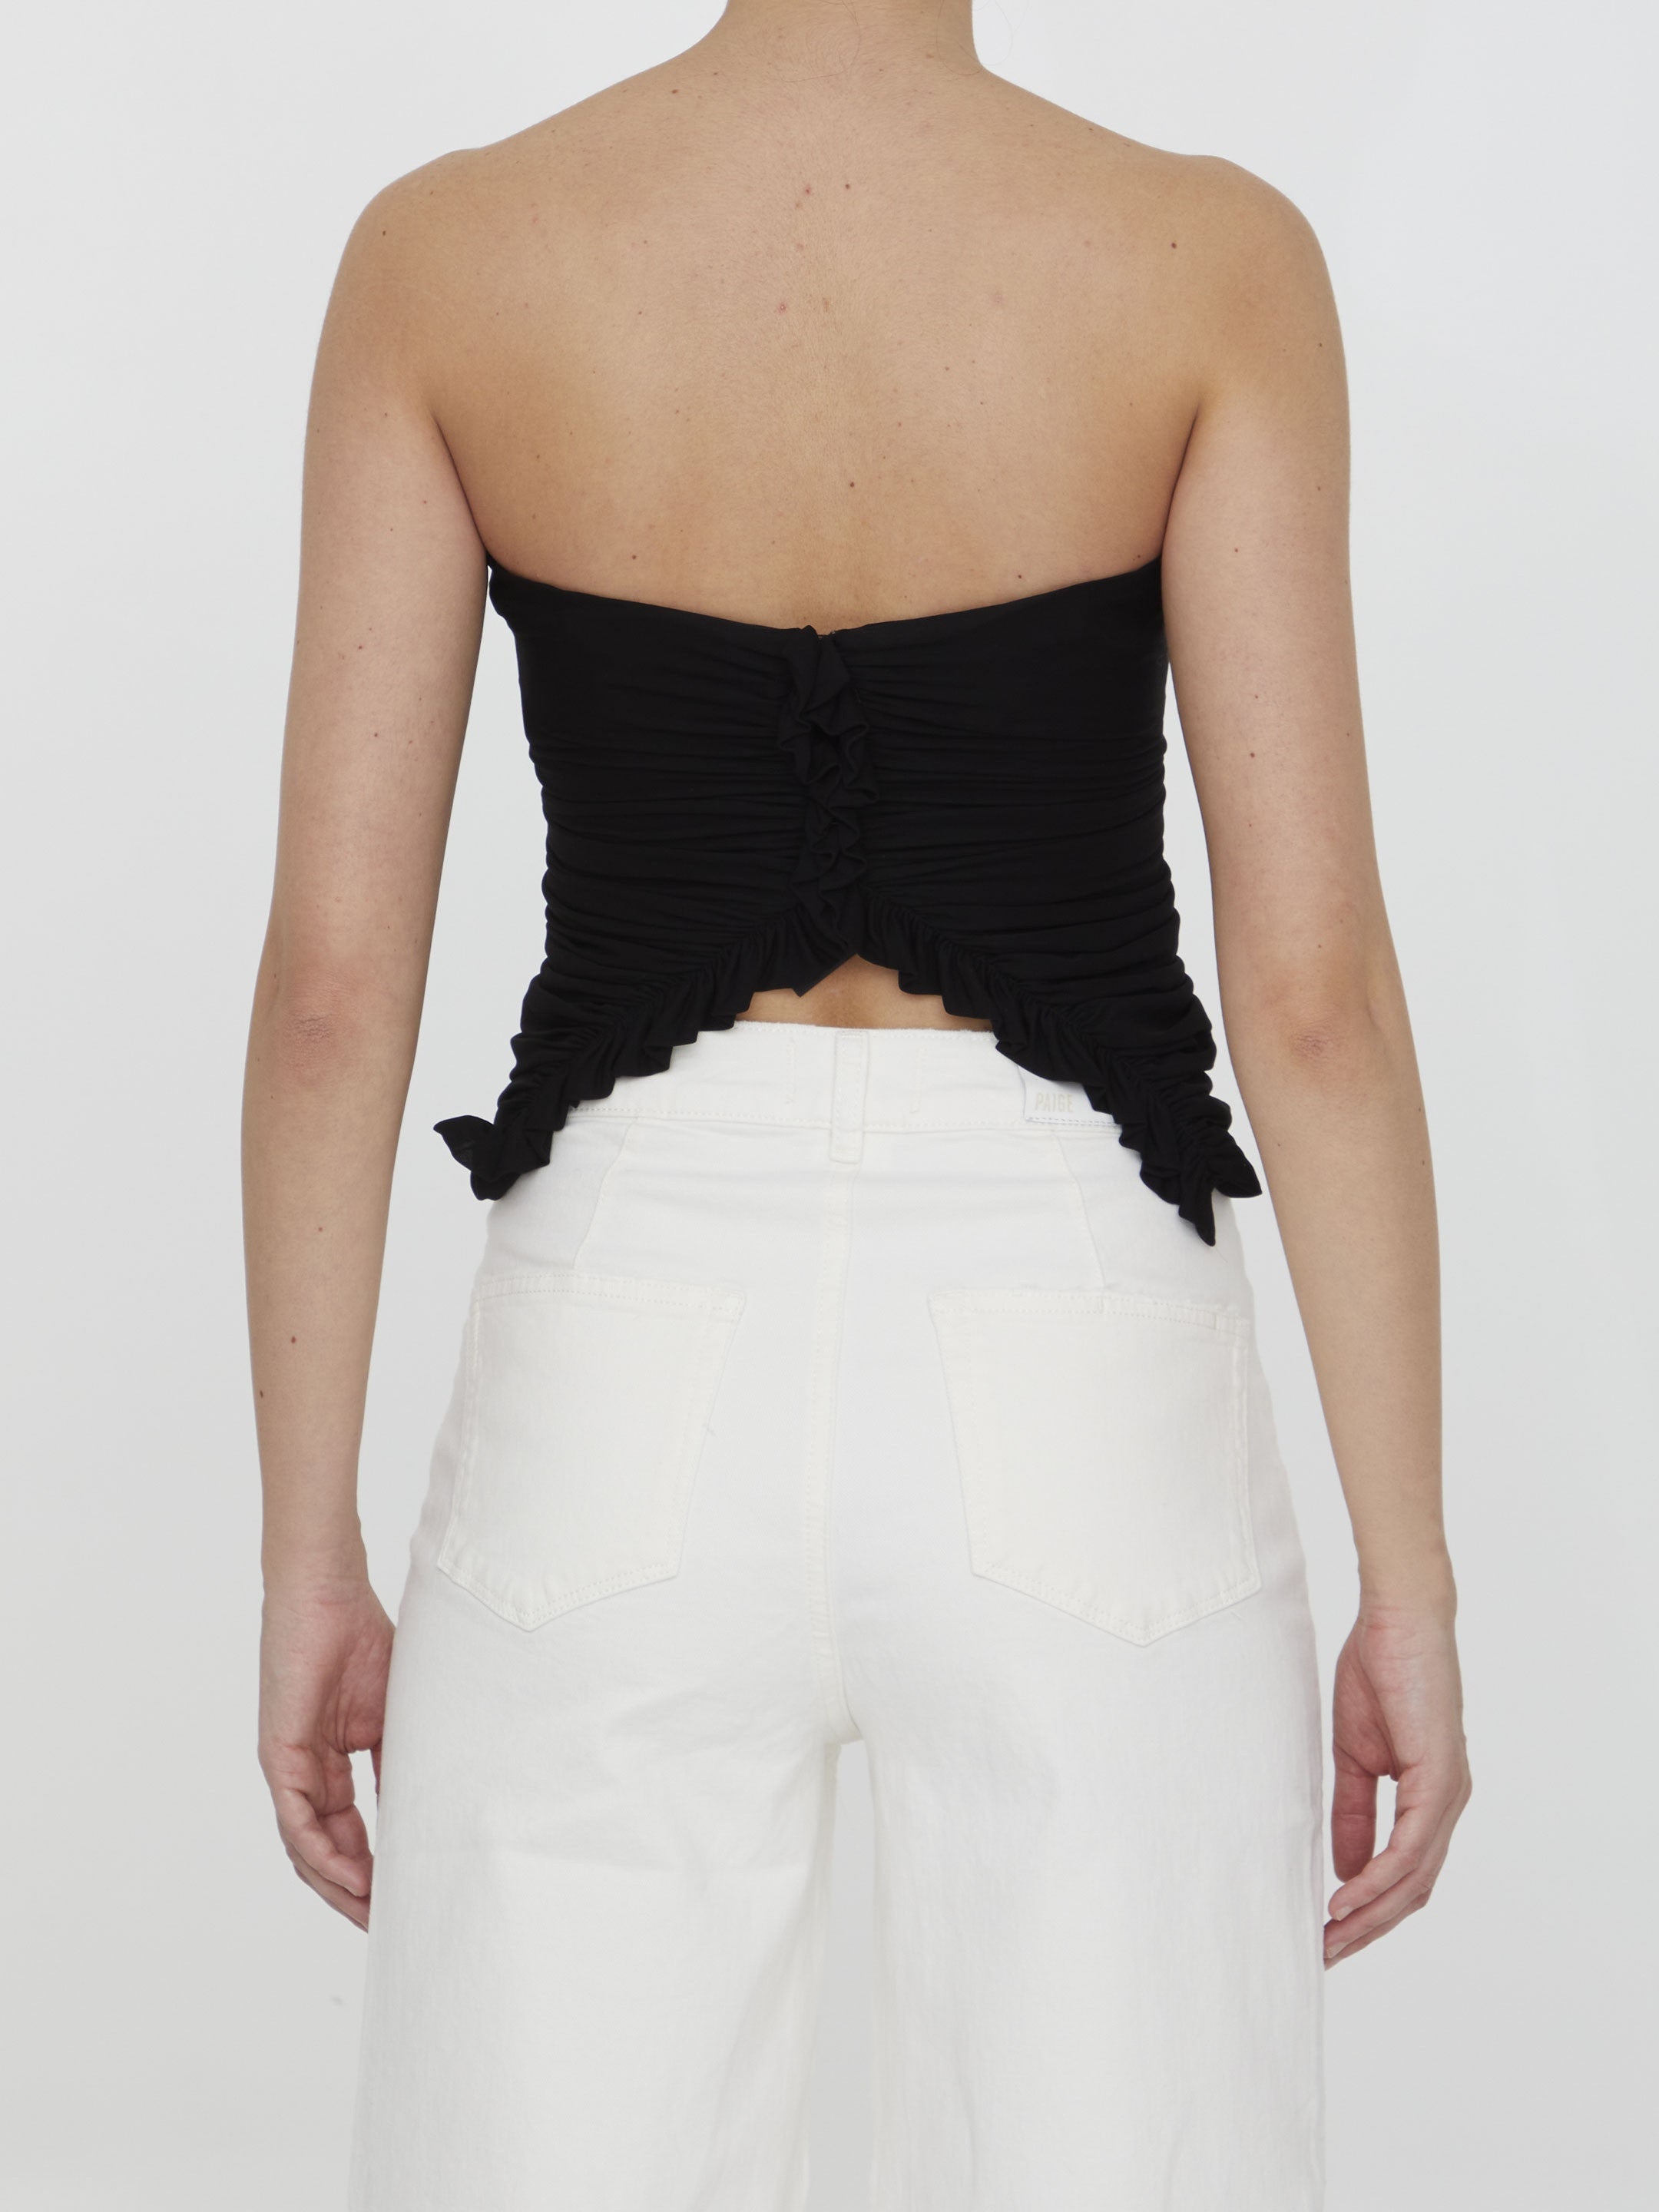 SAINT-LAURENT-OUTLET-SALE-Bustier-in-jersey-Shirts-38-BLACK-ARCHIVE-COLLECTION-4.jpg